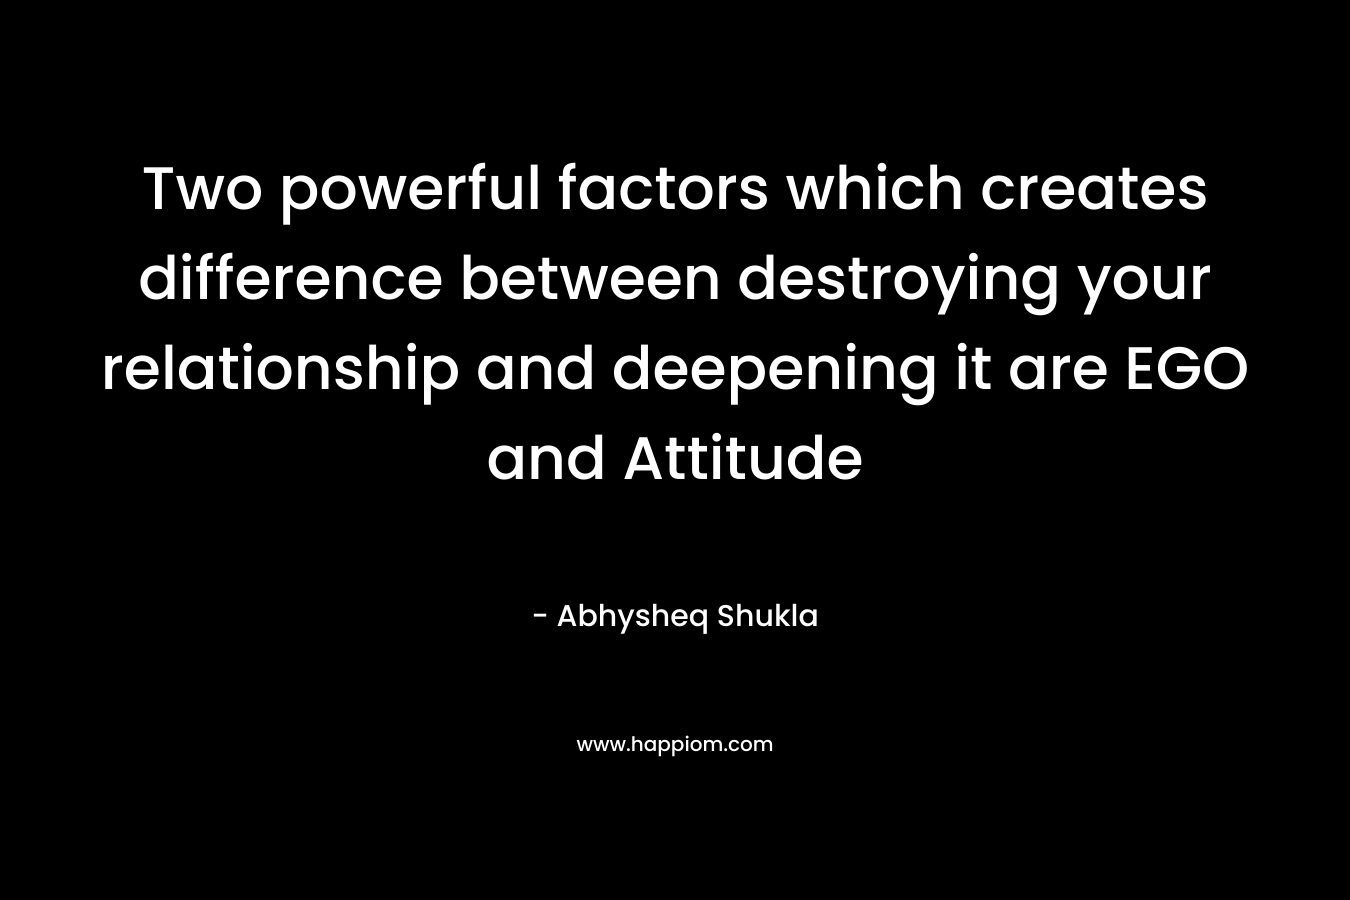 Two powerful factors which creates difference between destroying your relationship and deepening it are EGO and Attitude